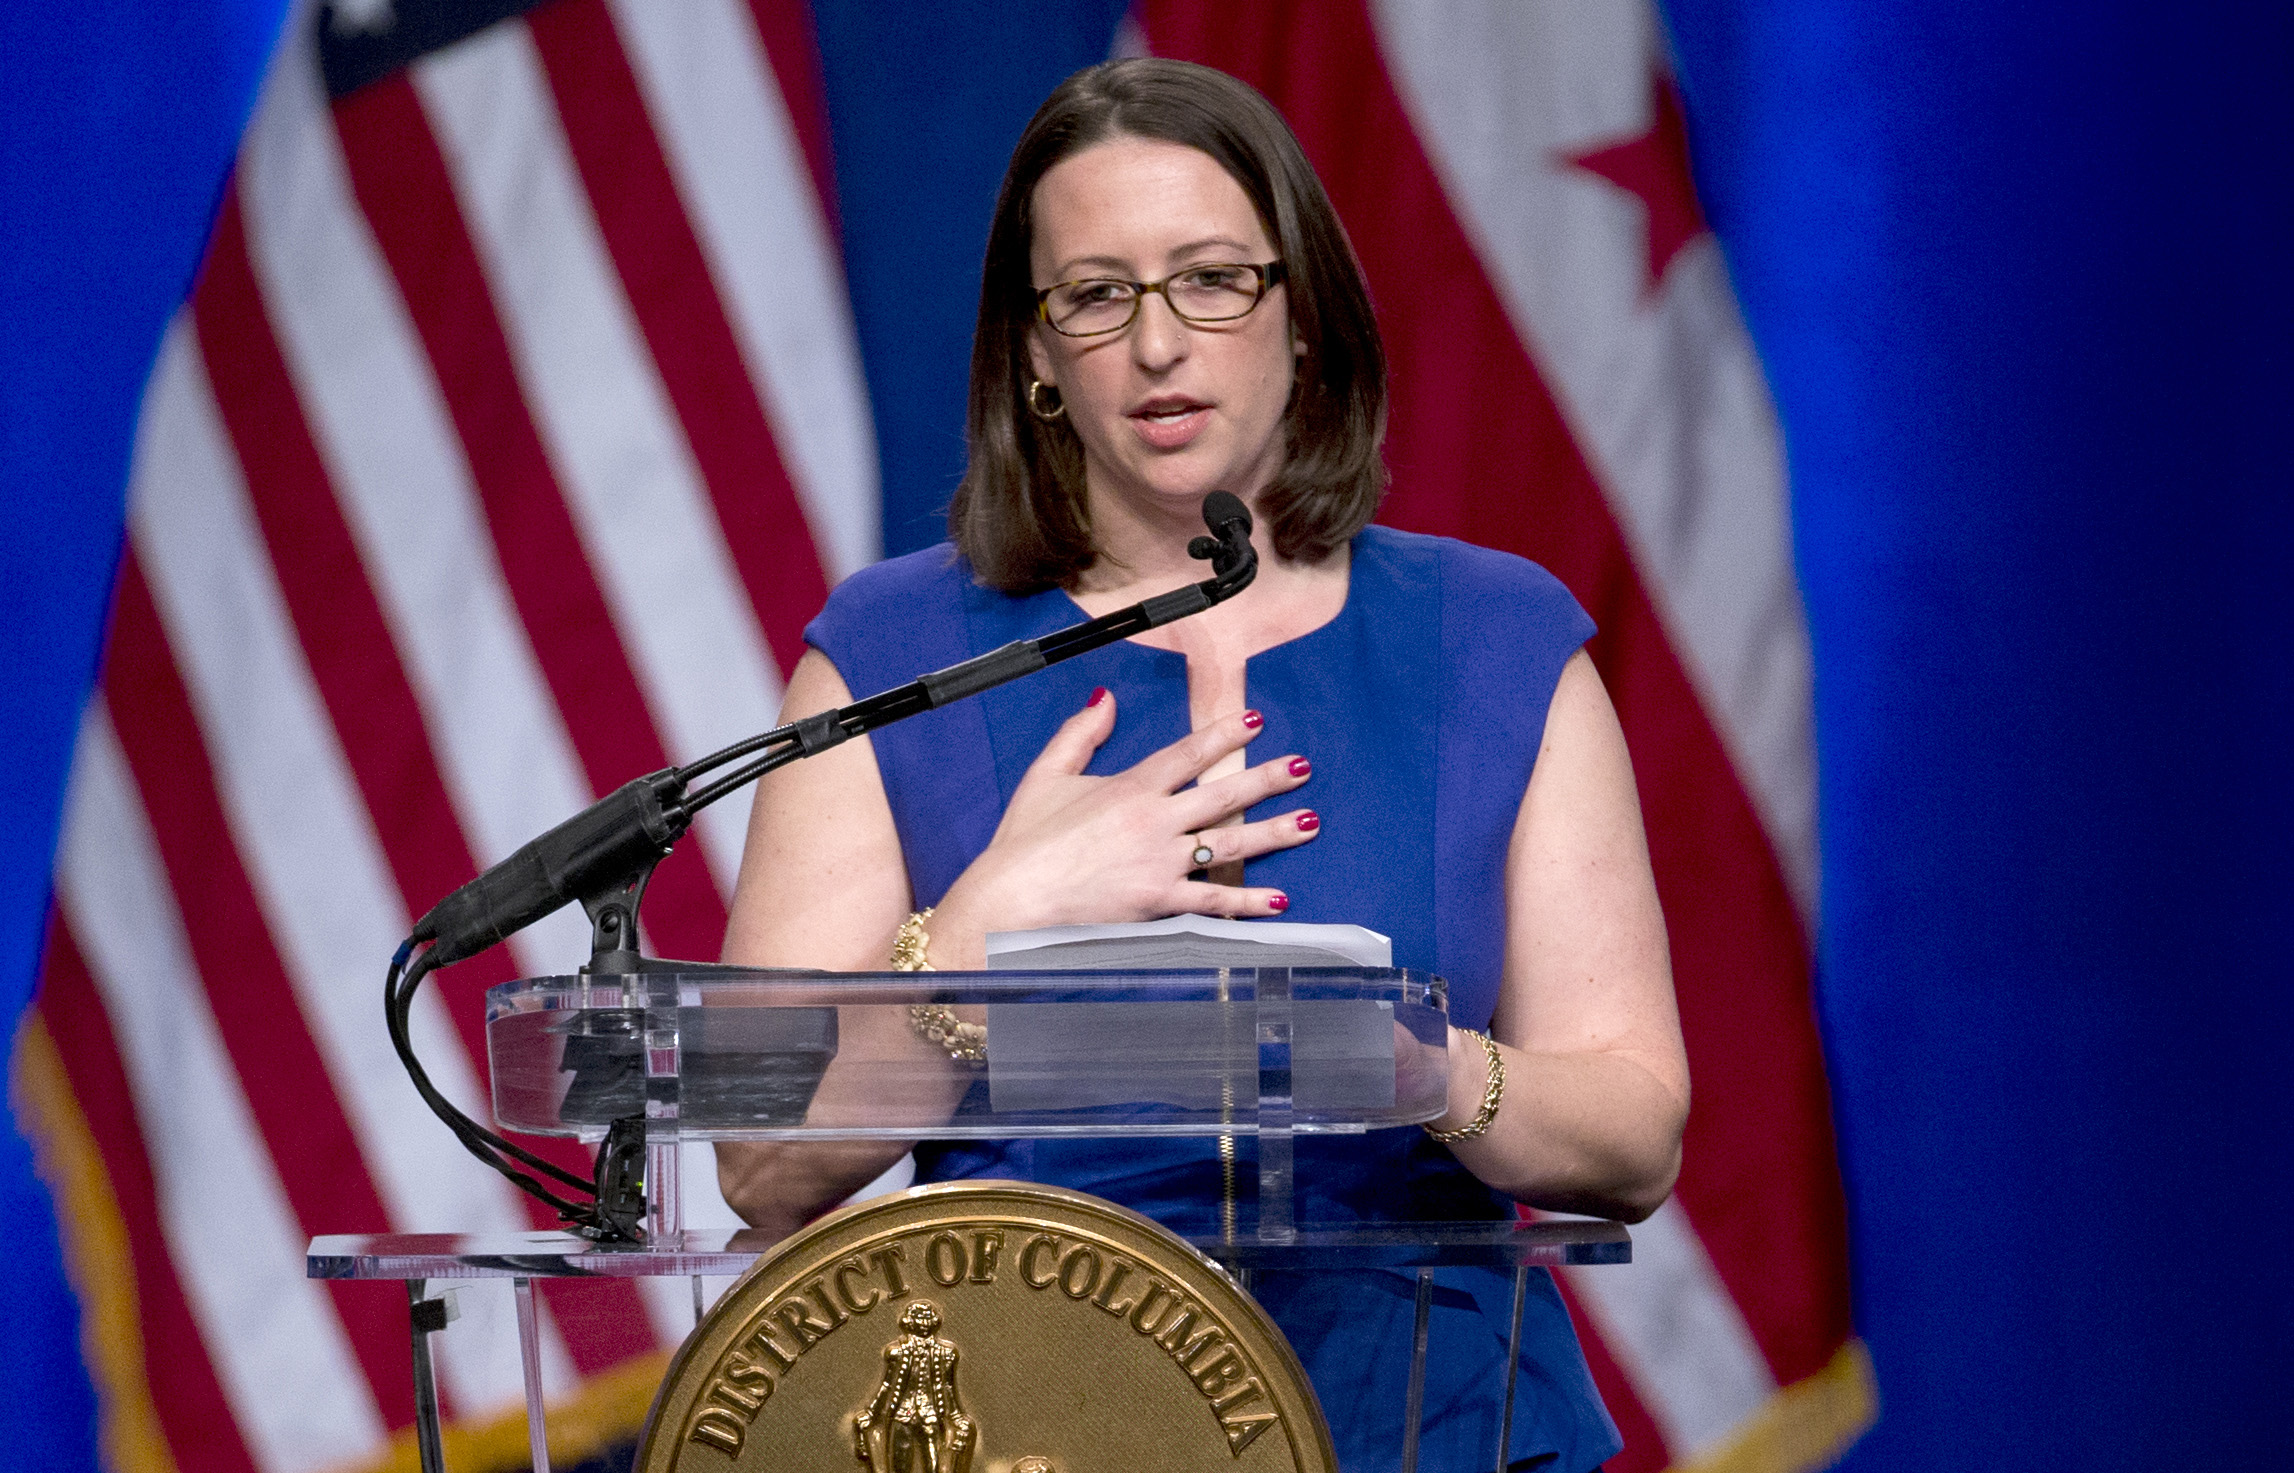 PHOTO: Ward One Councilmember Brianne Nadeau speaks during the 2015 District of Columbia Inauguration ceremony at the Convention Center in Washington, Jan. 2, 2015.